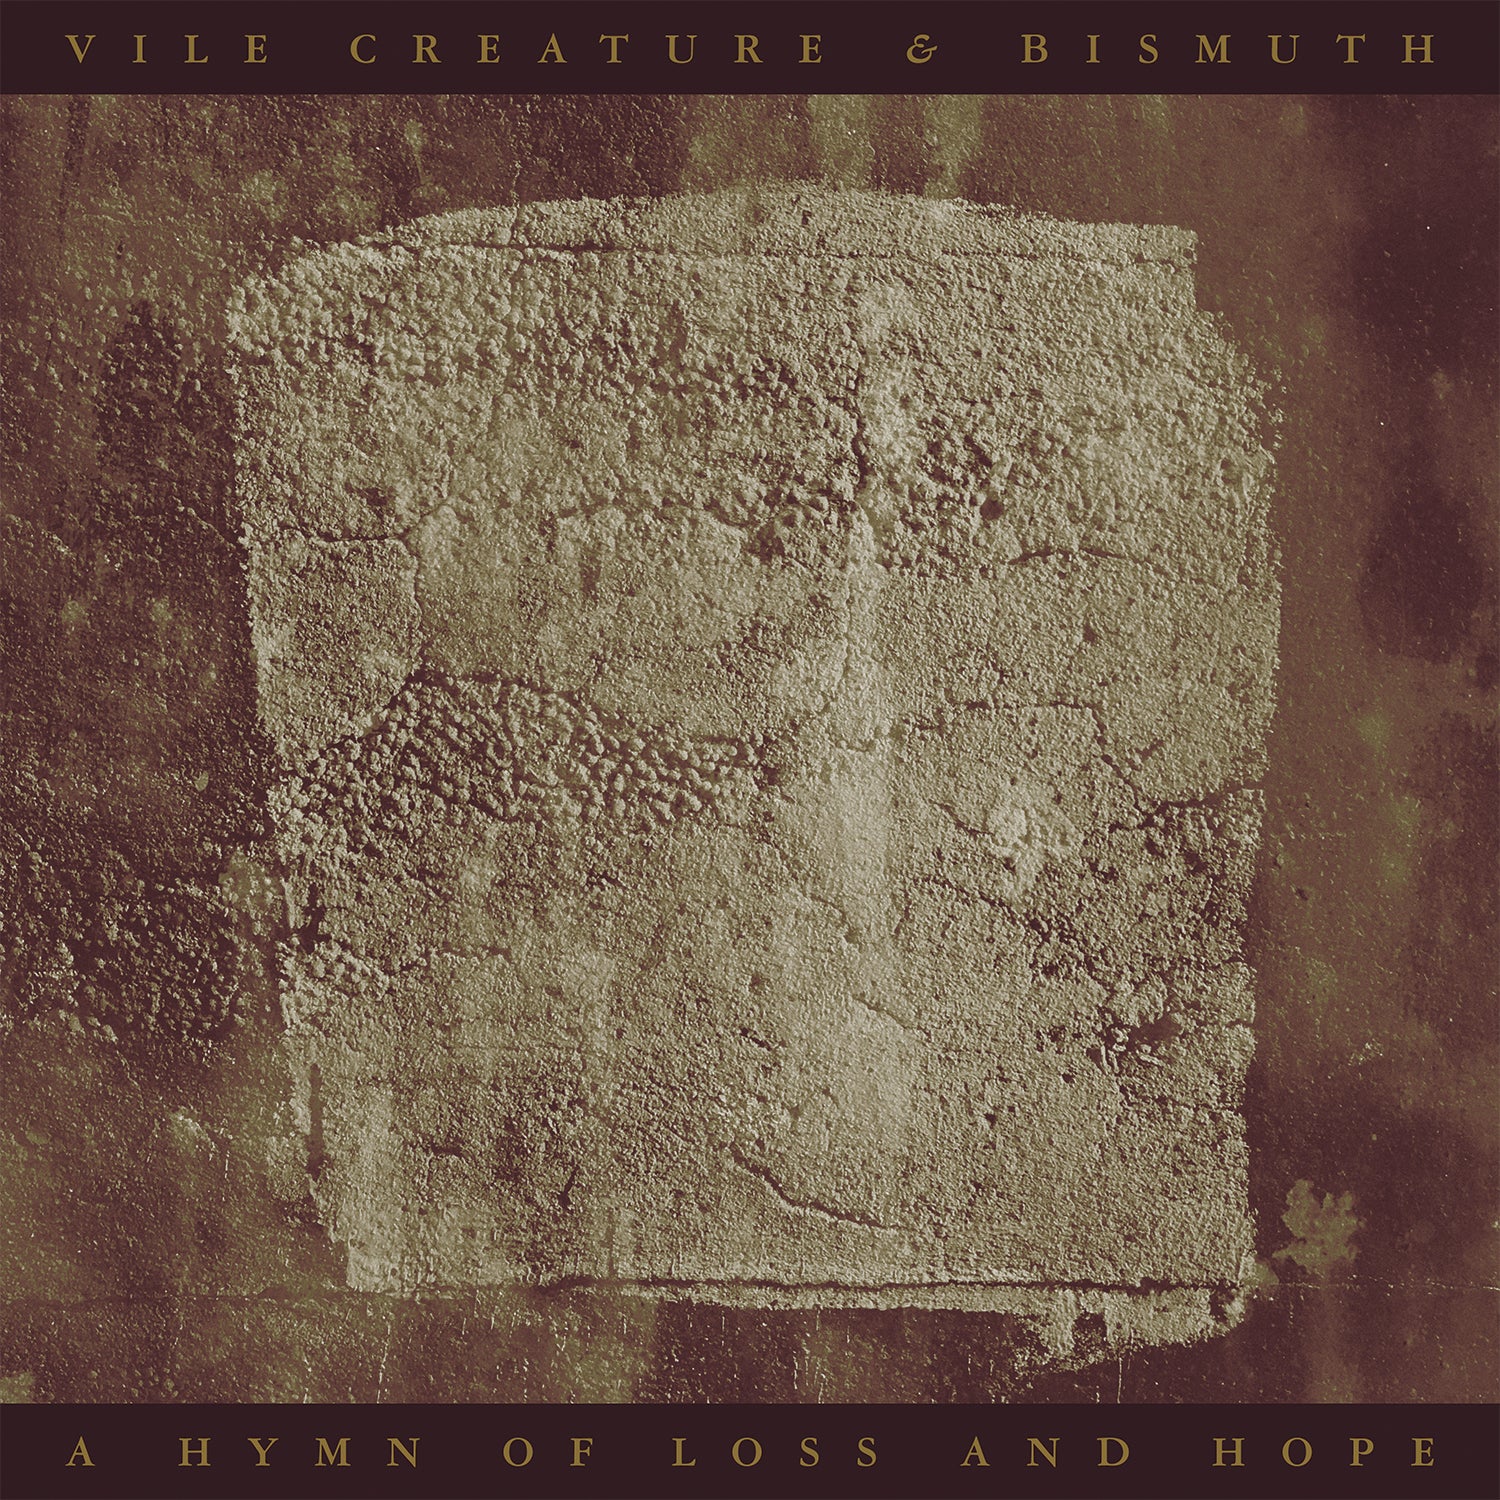 VILE CREATURE & BISMUTH - A Hymn of Loss and Hope